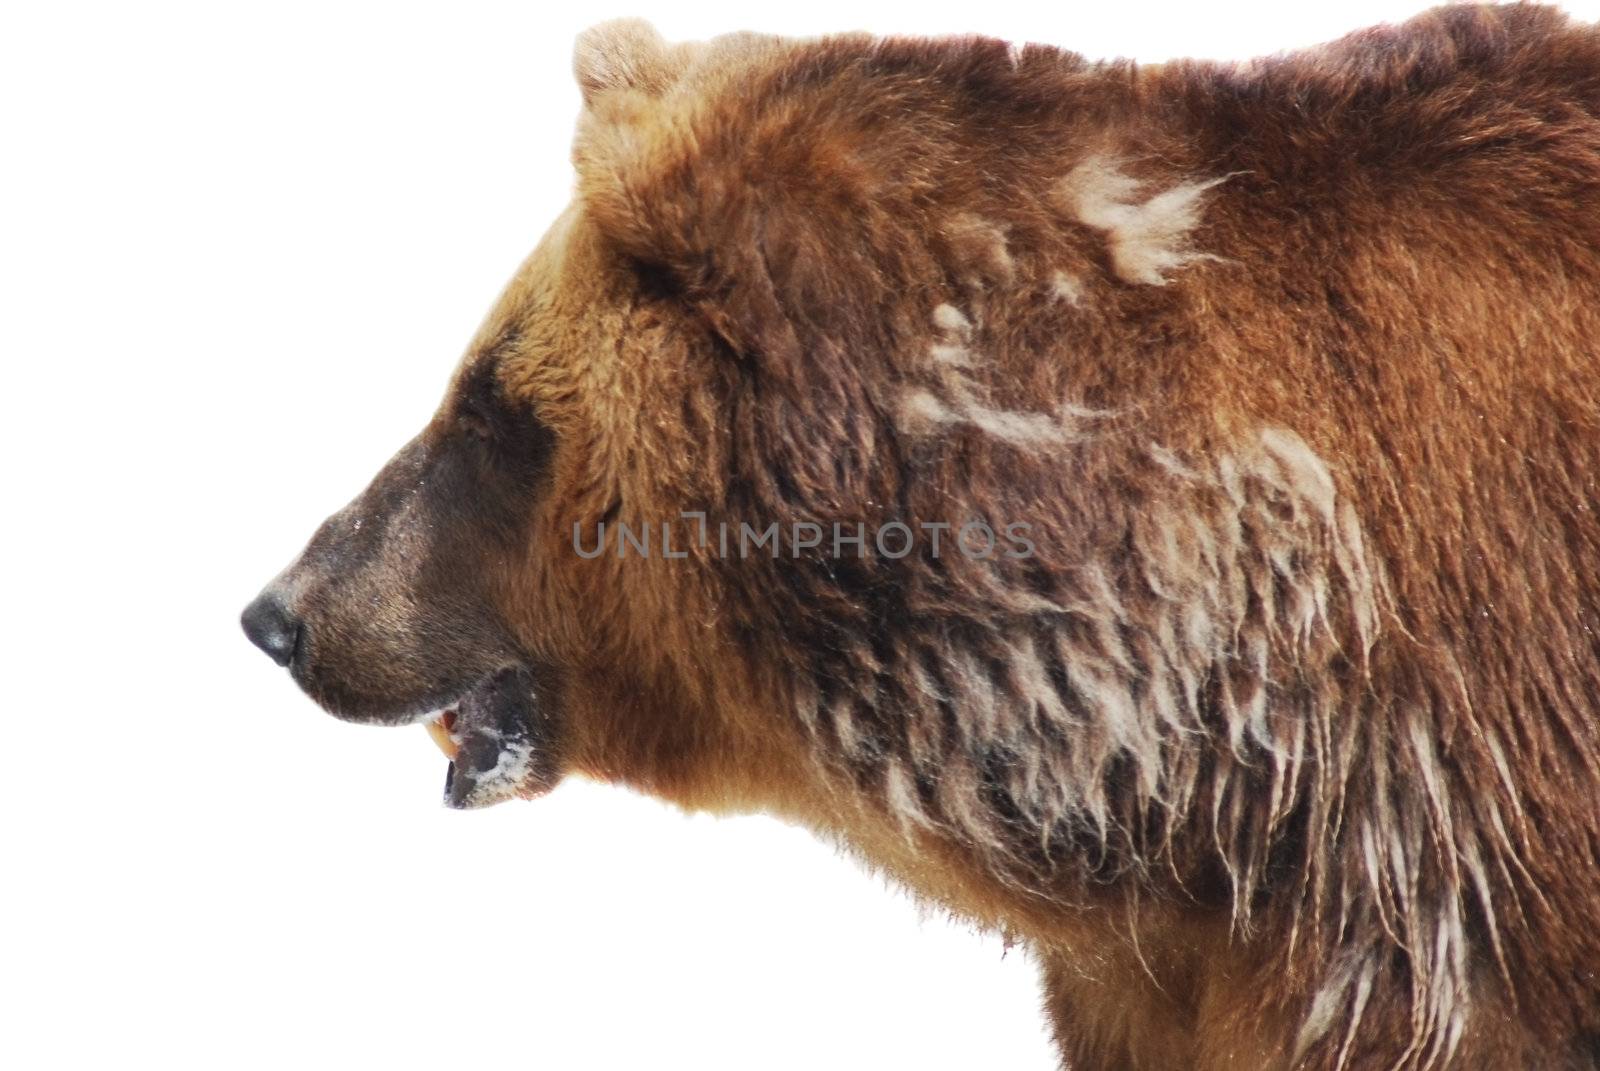 The brown bear close up isolated on white, wild life by svtrotof